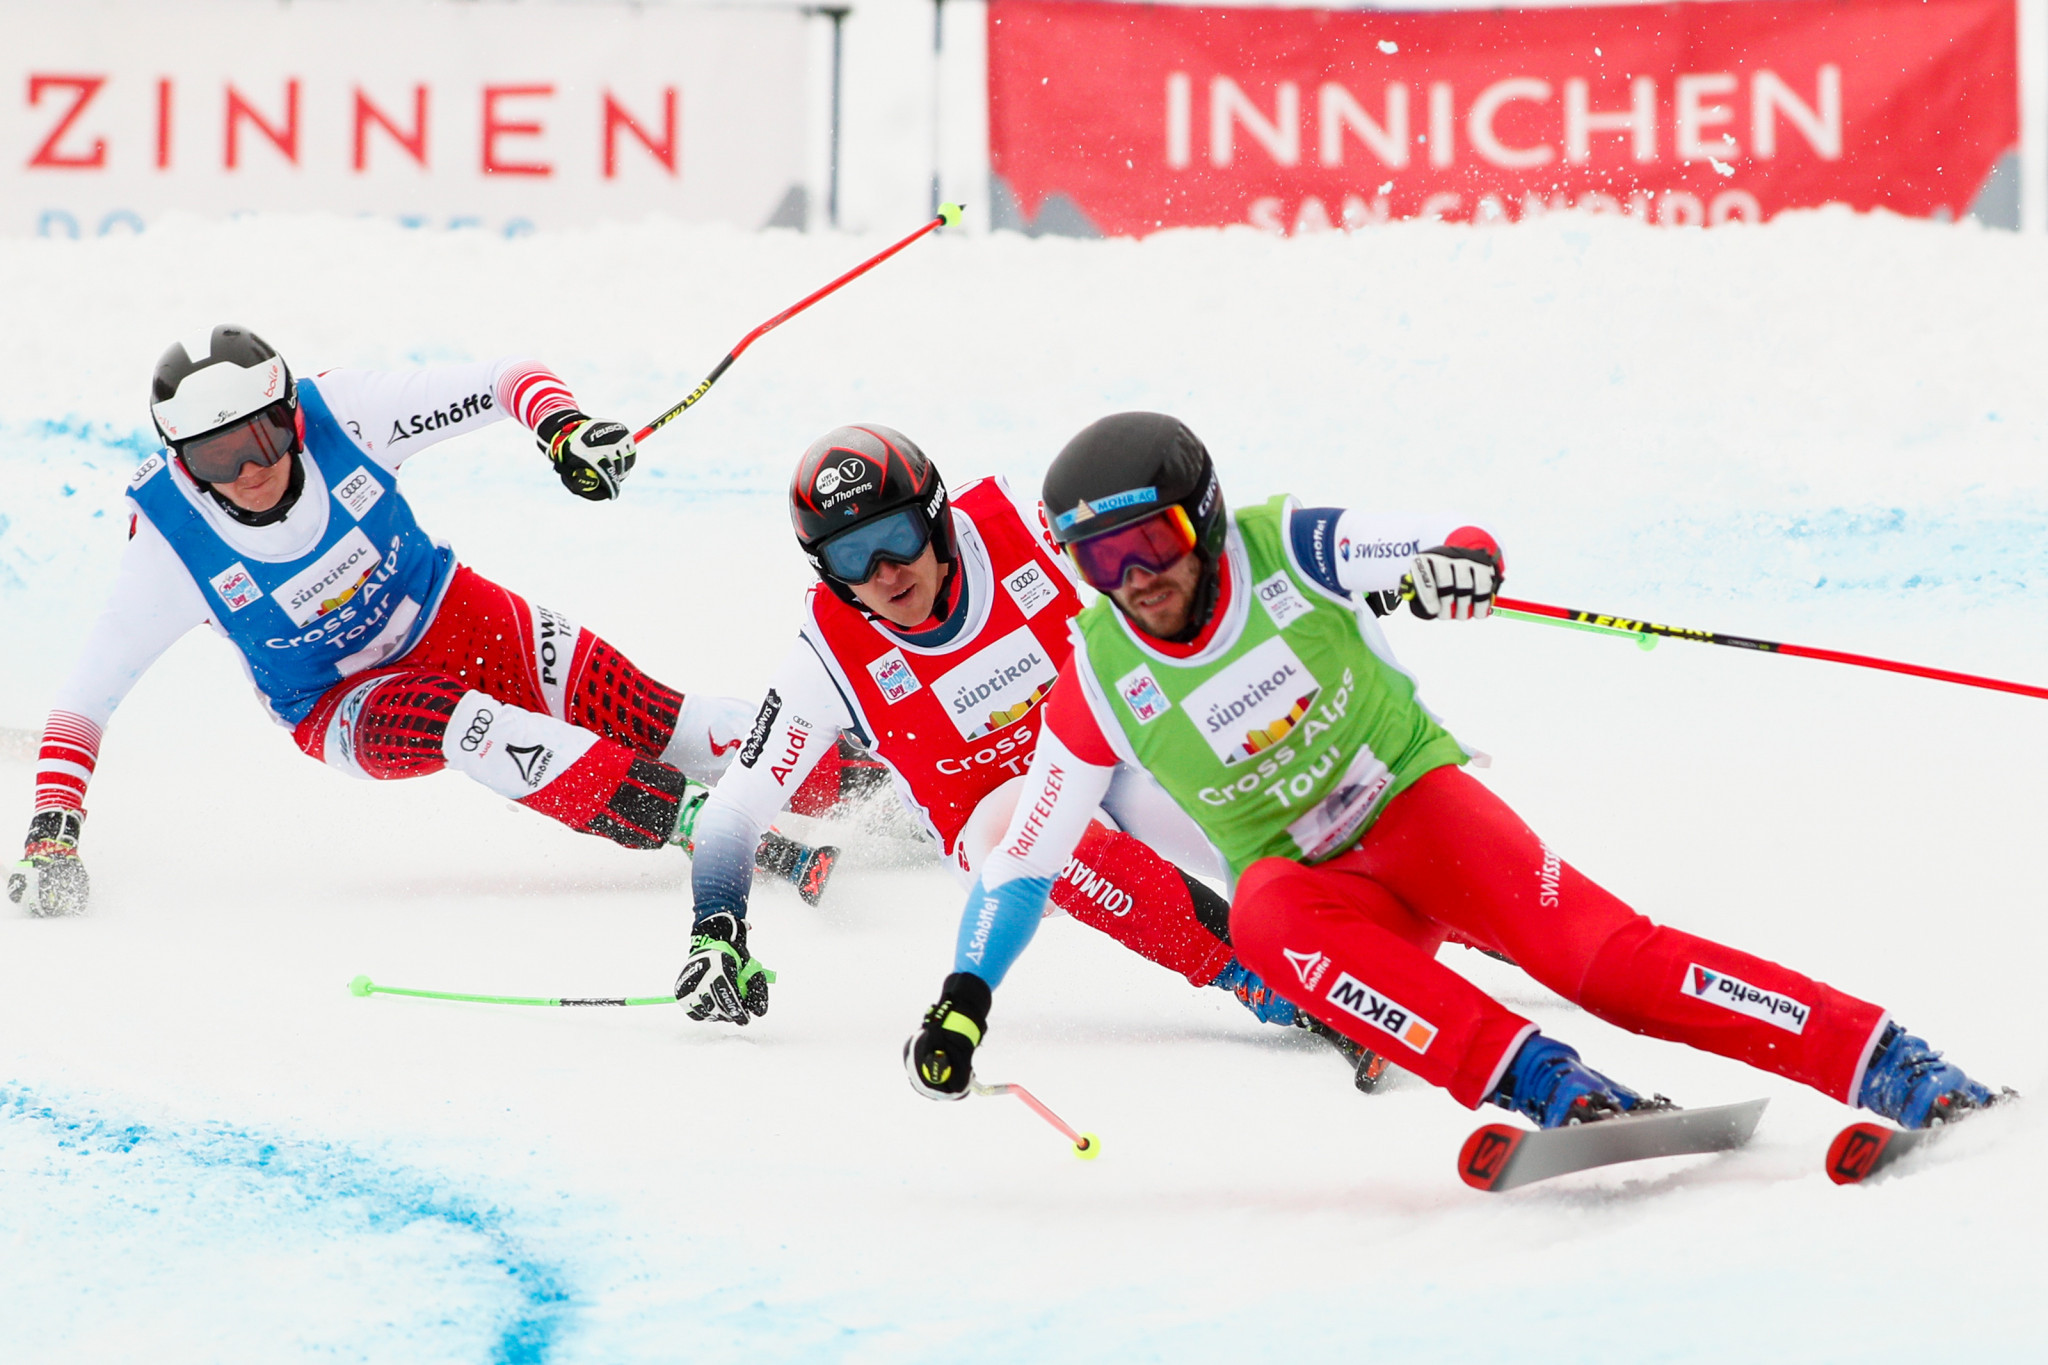 There will be no FIS Ski Cross World Cup in Innichen/San Candido this year ©Getty Images